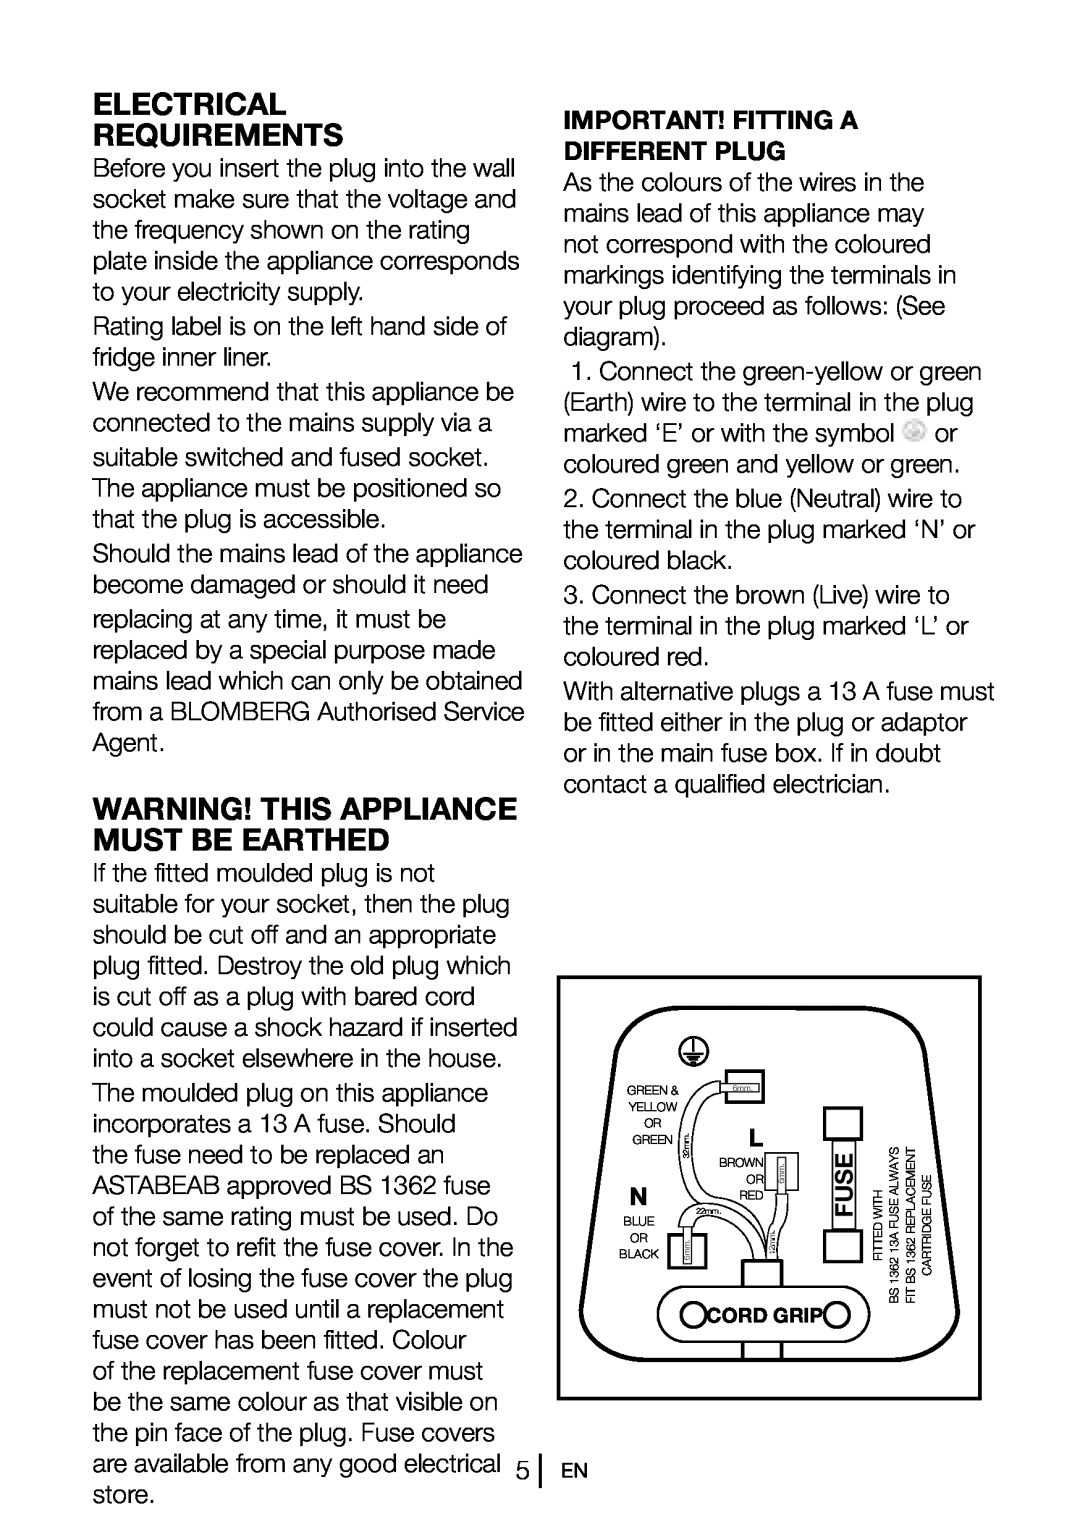 Blomberg KGM 9690 Electrical Requirements, Warning! This Appliance Must Be Earthed, Important! Fitting A Different Plug 